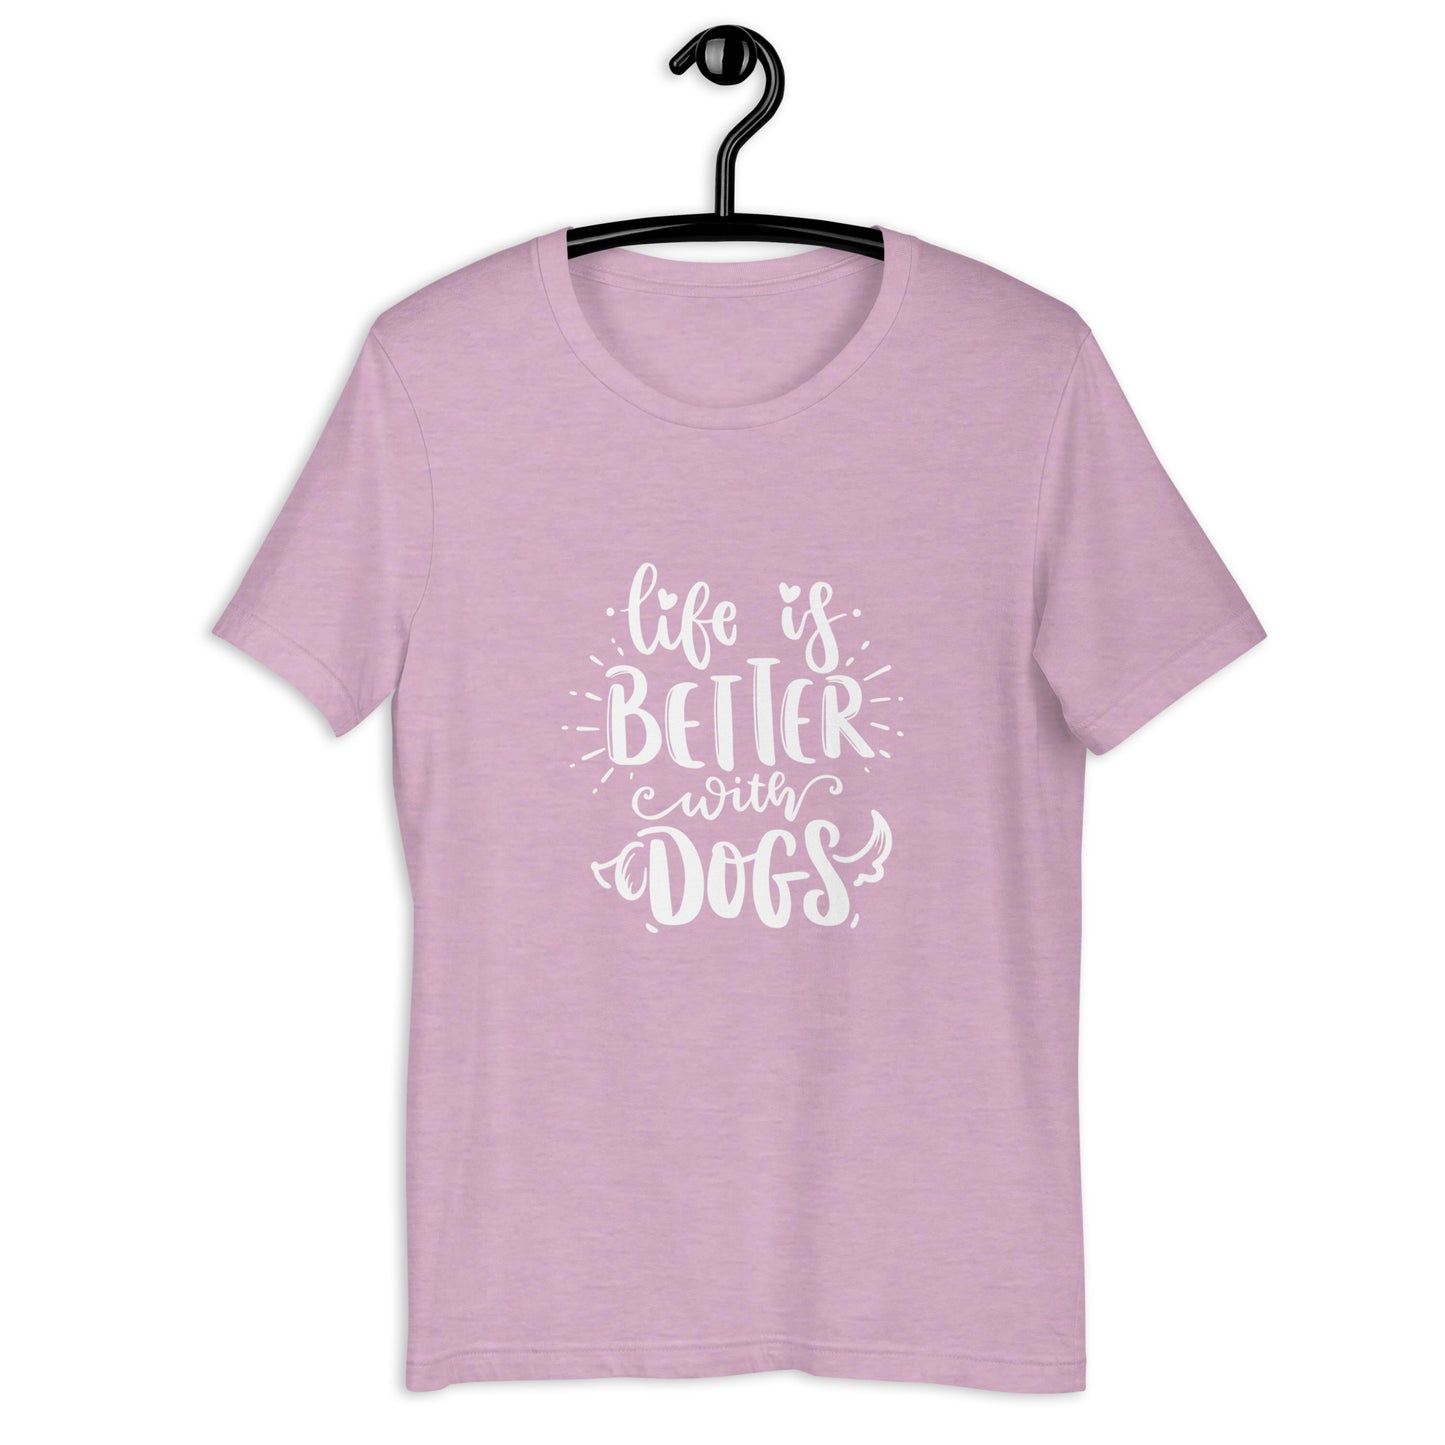 LIFE IS BETTER WITH DOGS - Unisex t-shirt